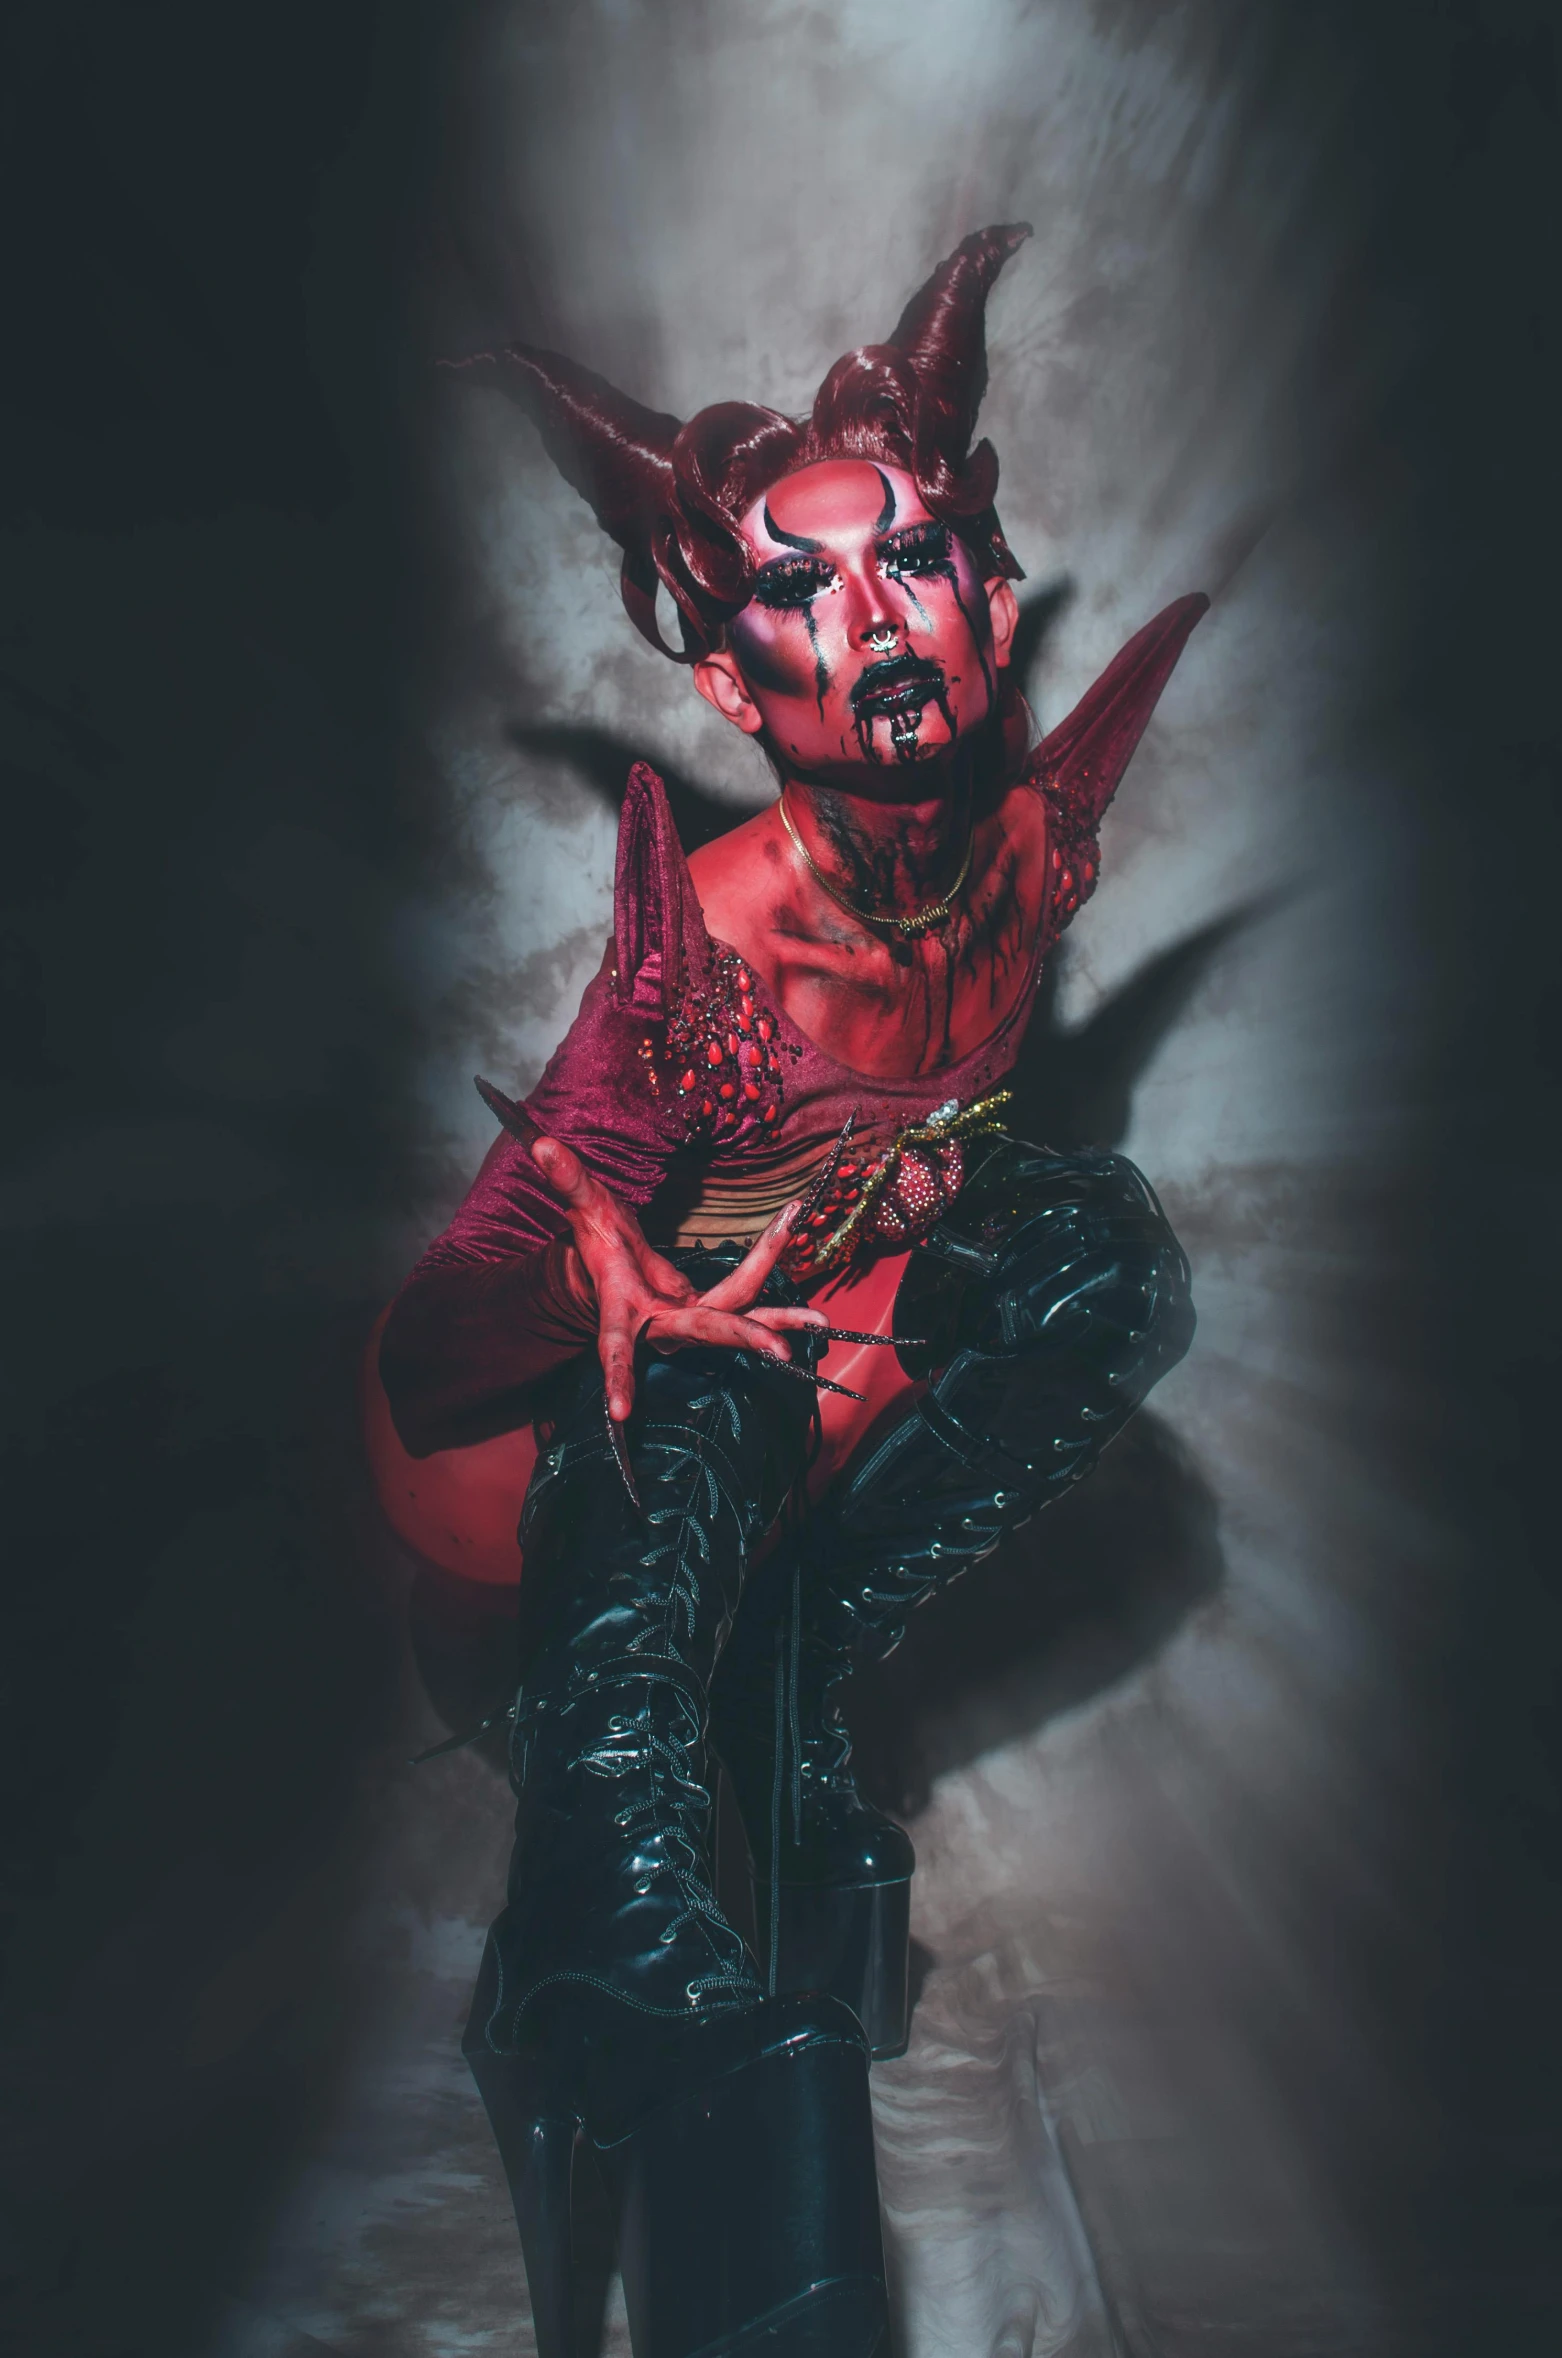 a demon sitting on top of a chair, red skin, prosthetic makeup, with horns, drag